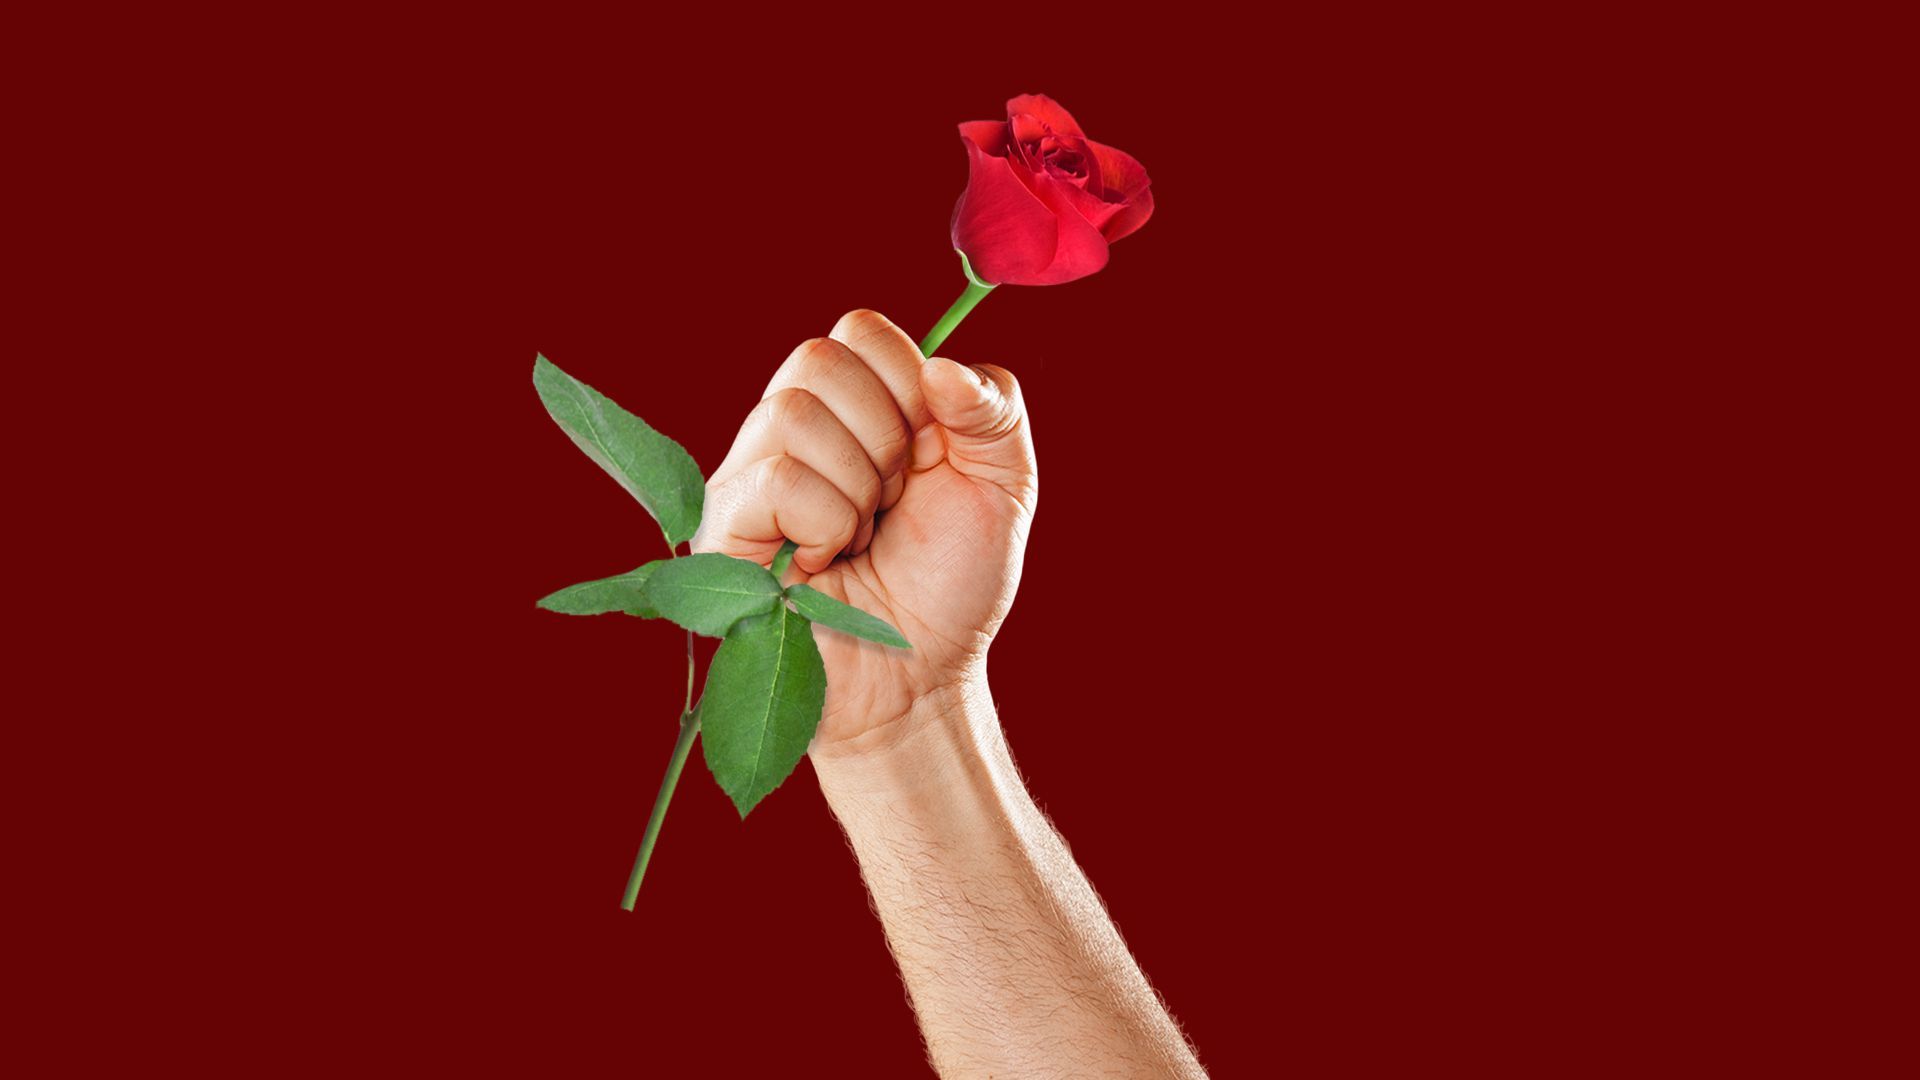 Illustration of a fist clenching a rose